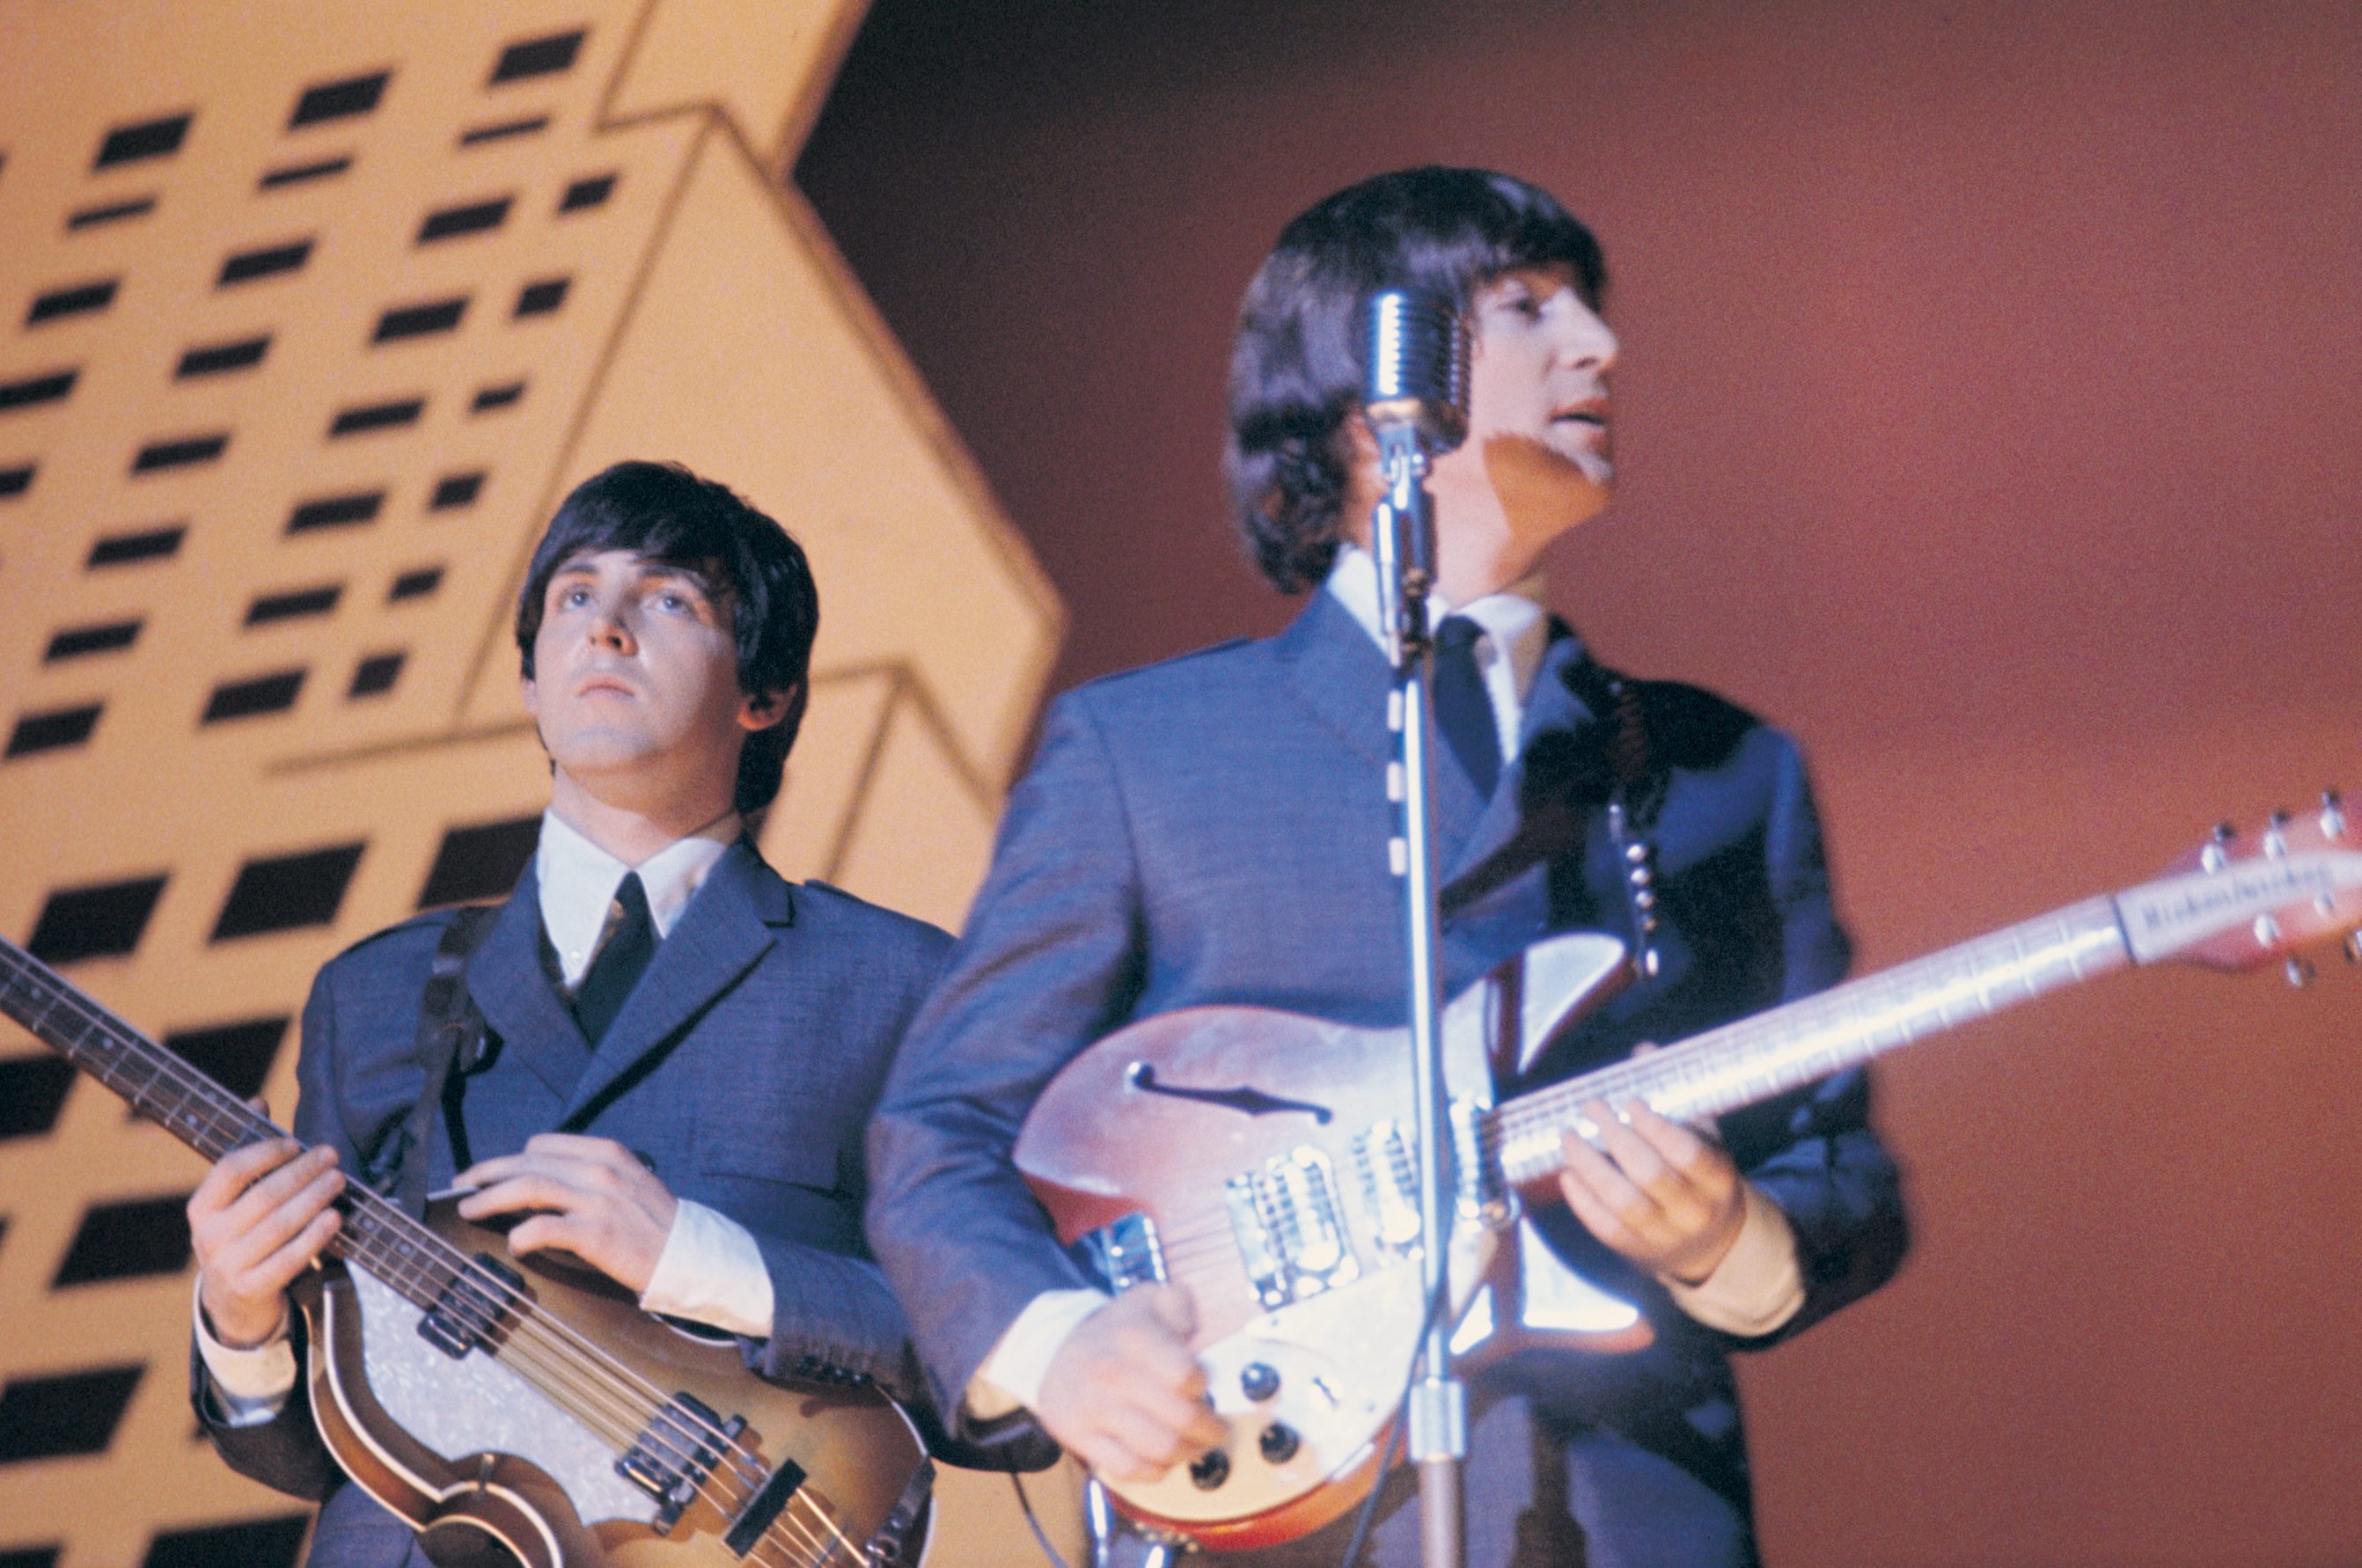 Paul McCartney and John Lennon performing with The Beatles during their American tour